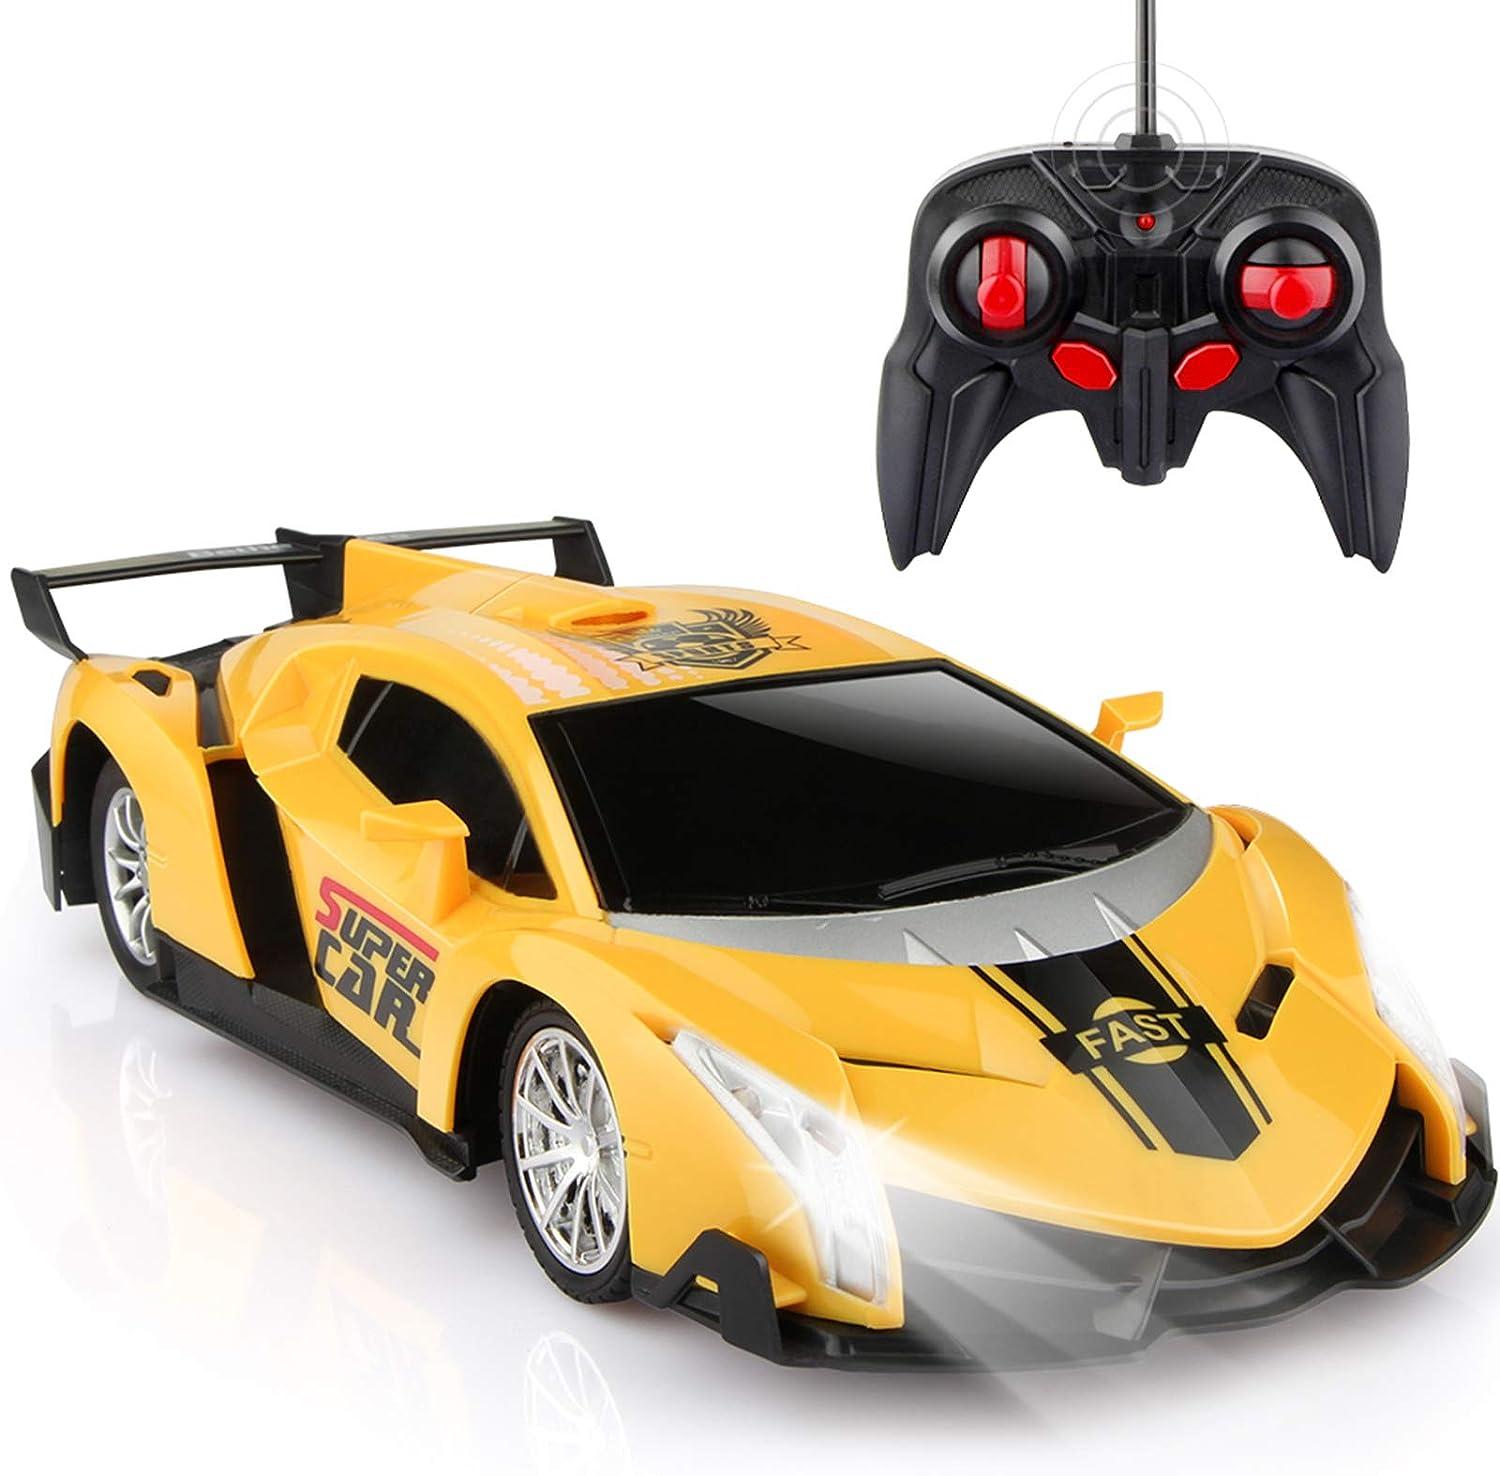 Remote Control Car Online Shopping: Popular Online Retailers for Remote Control Cars